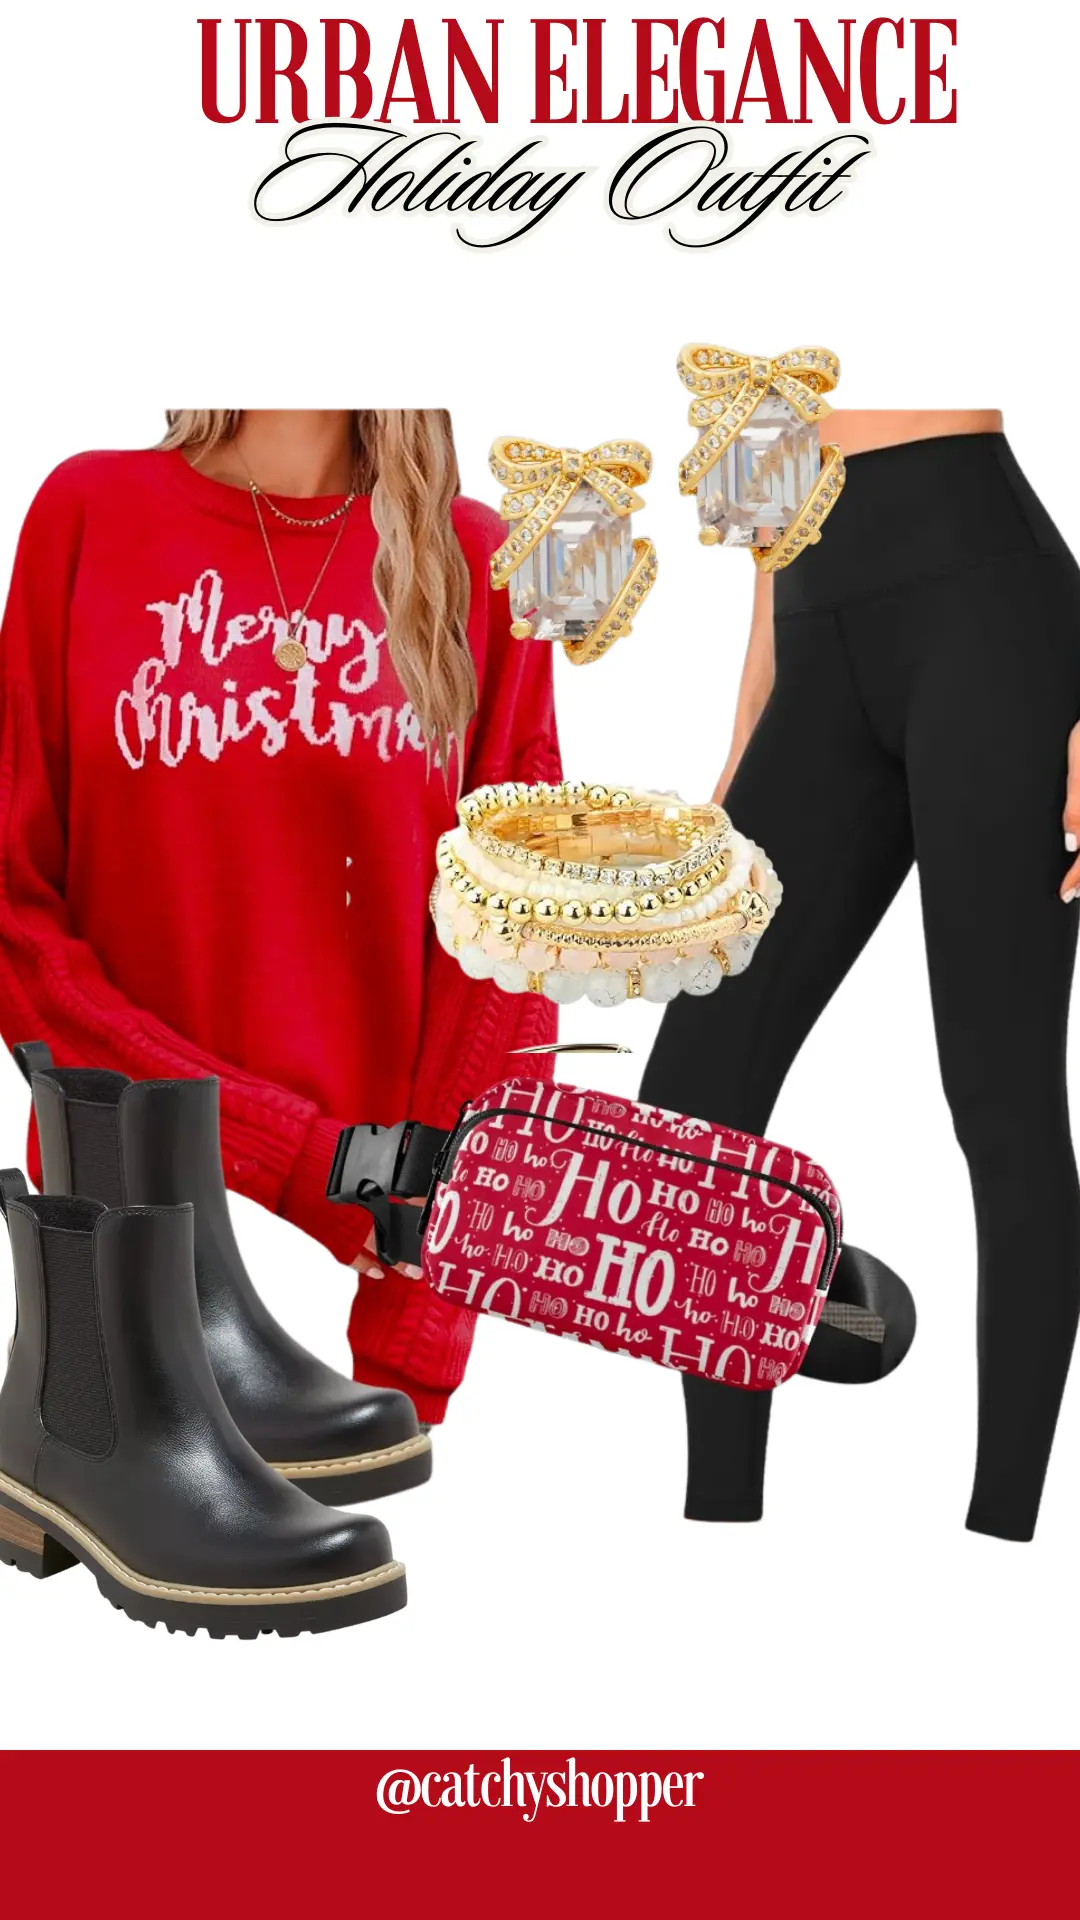 Urban Elegance Holiday Outfit 